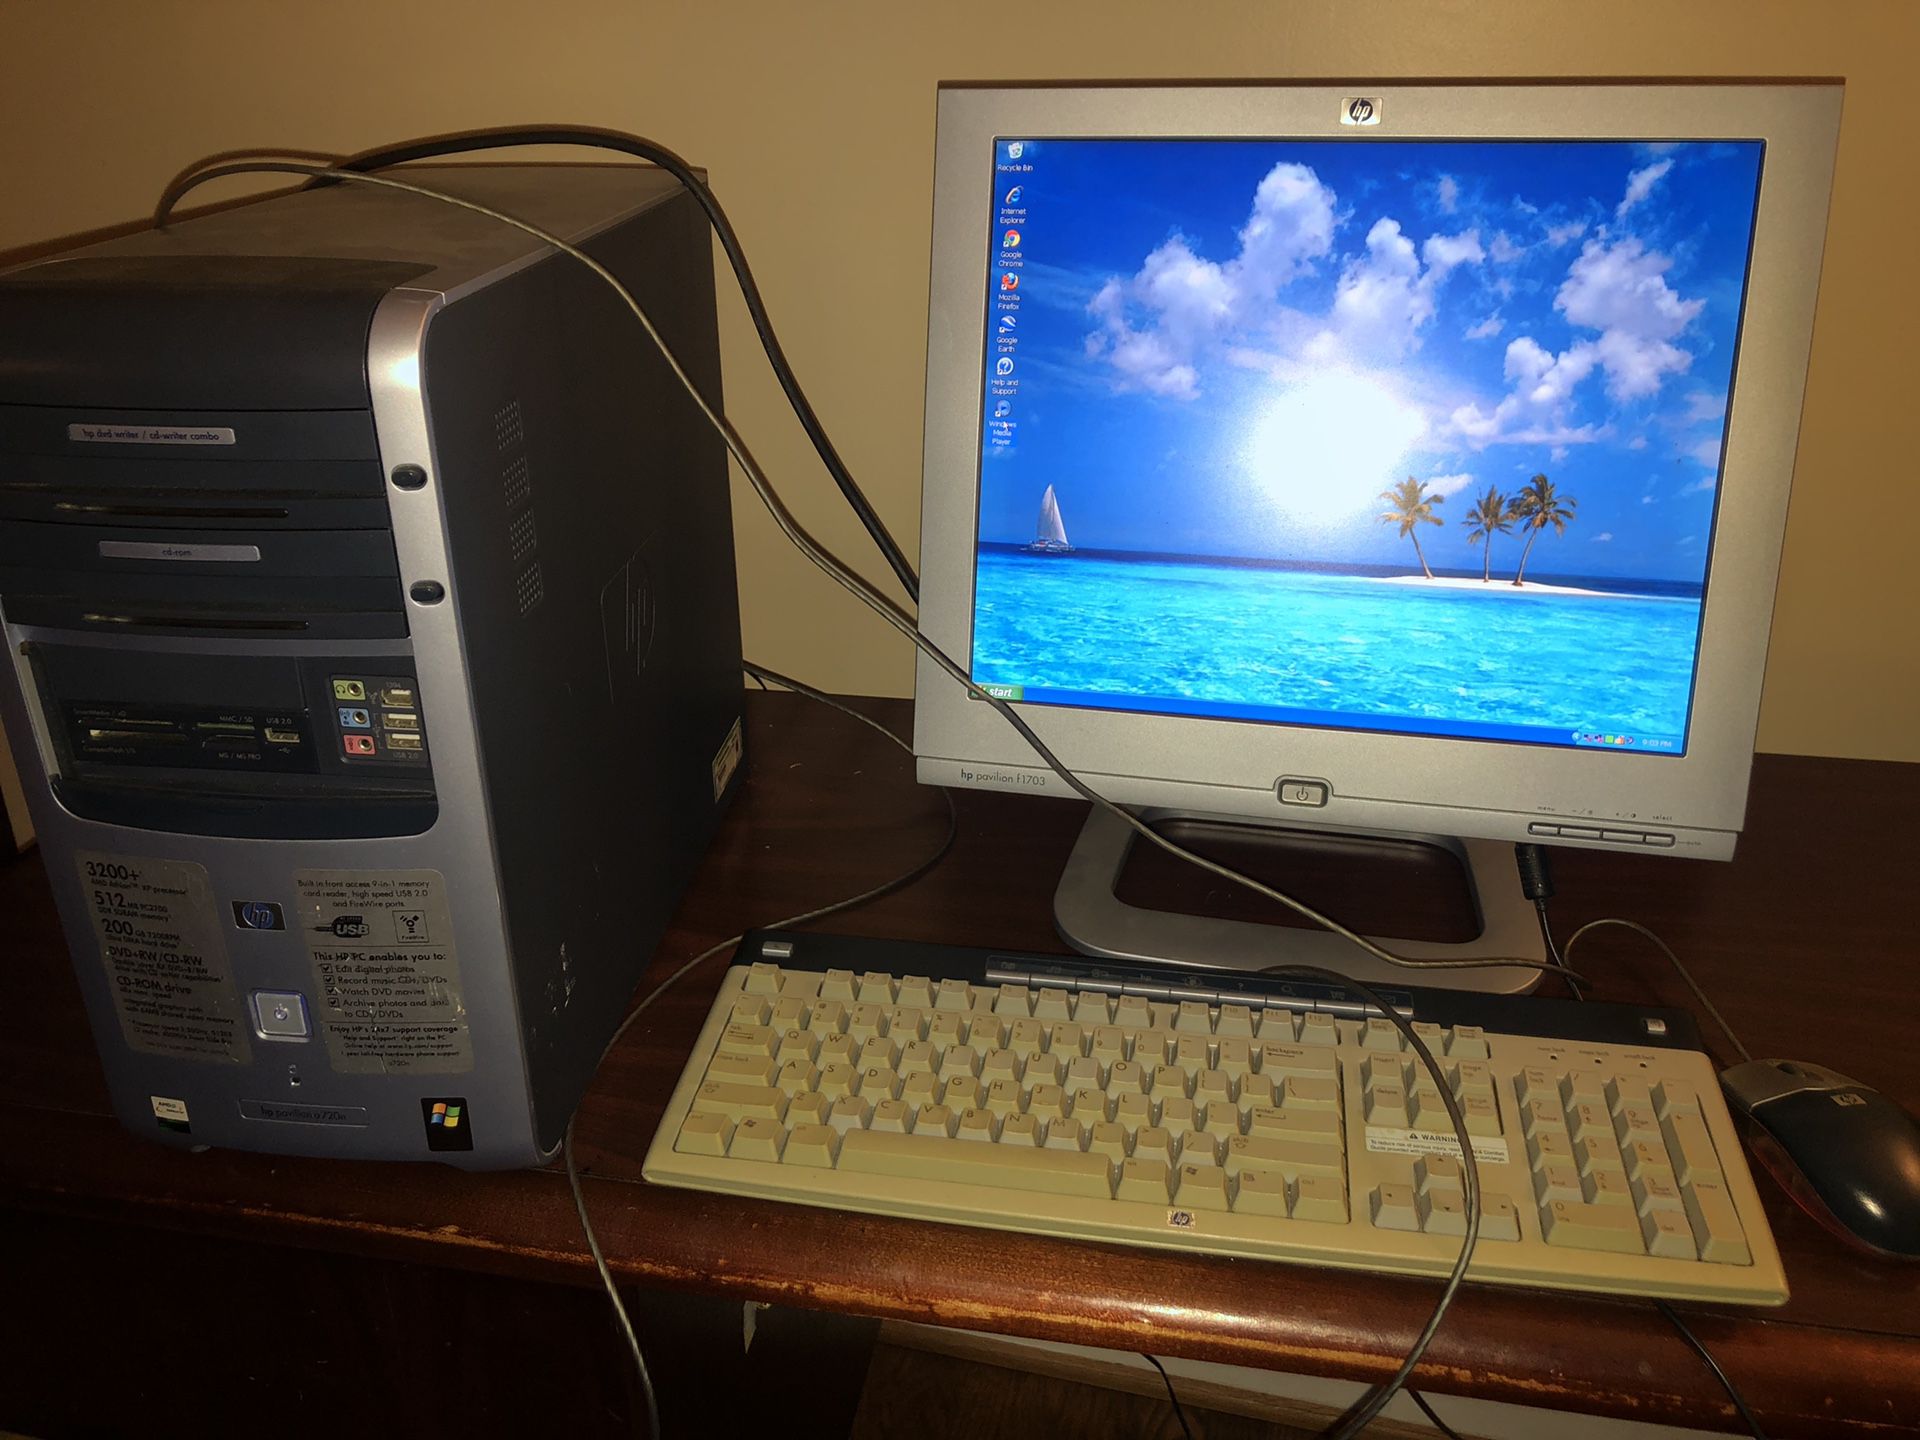 HP Pavilion a720n desktop computer with 17” flat screen monitor, keyboard and mouse